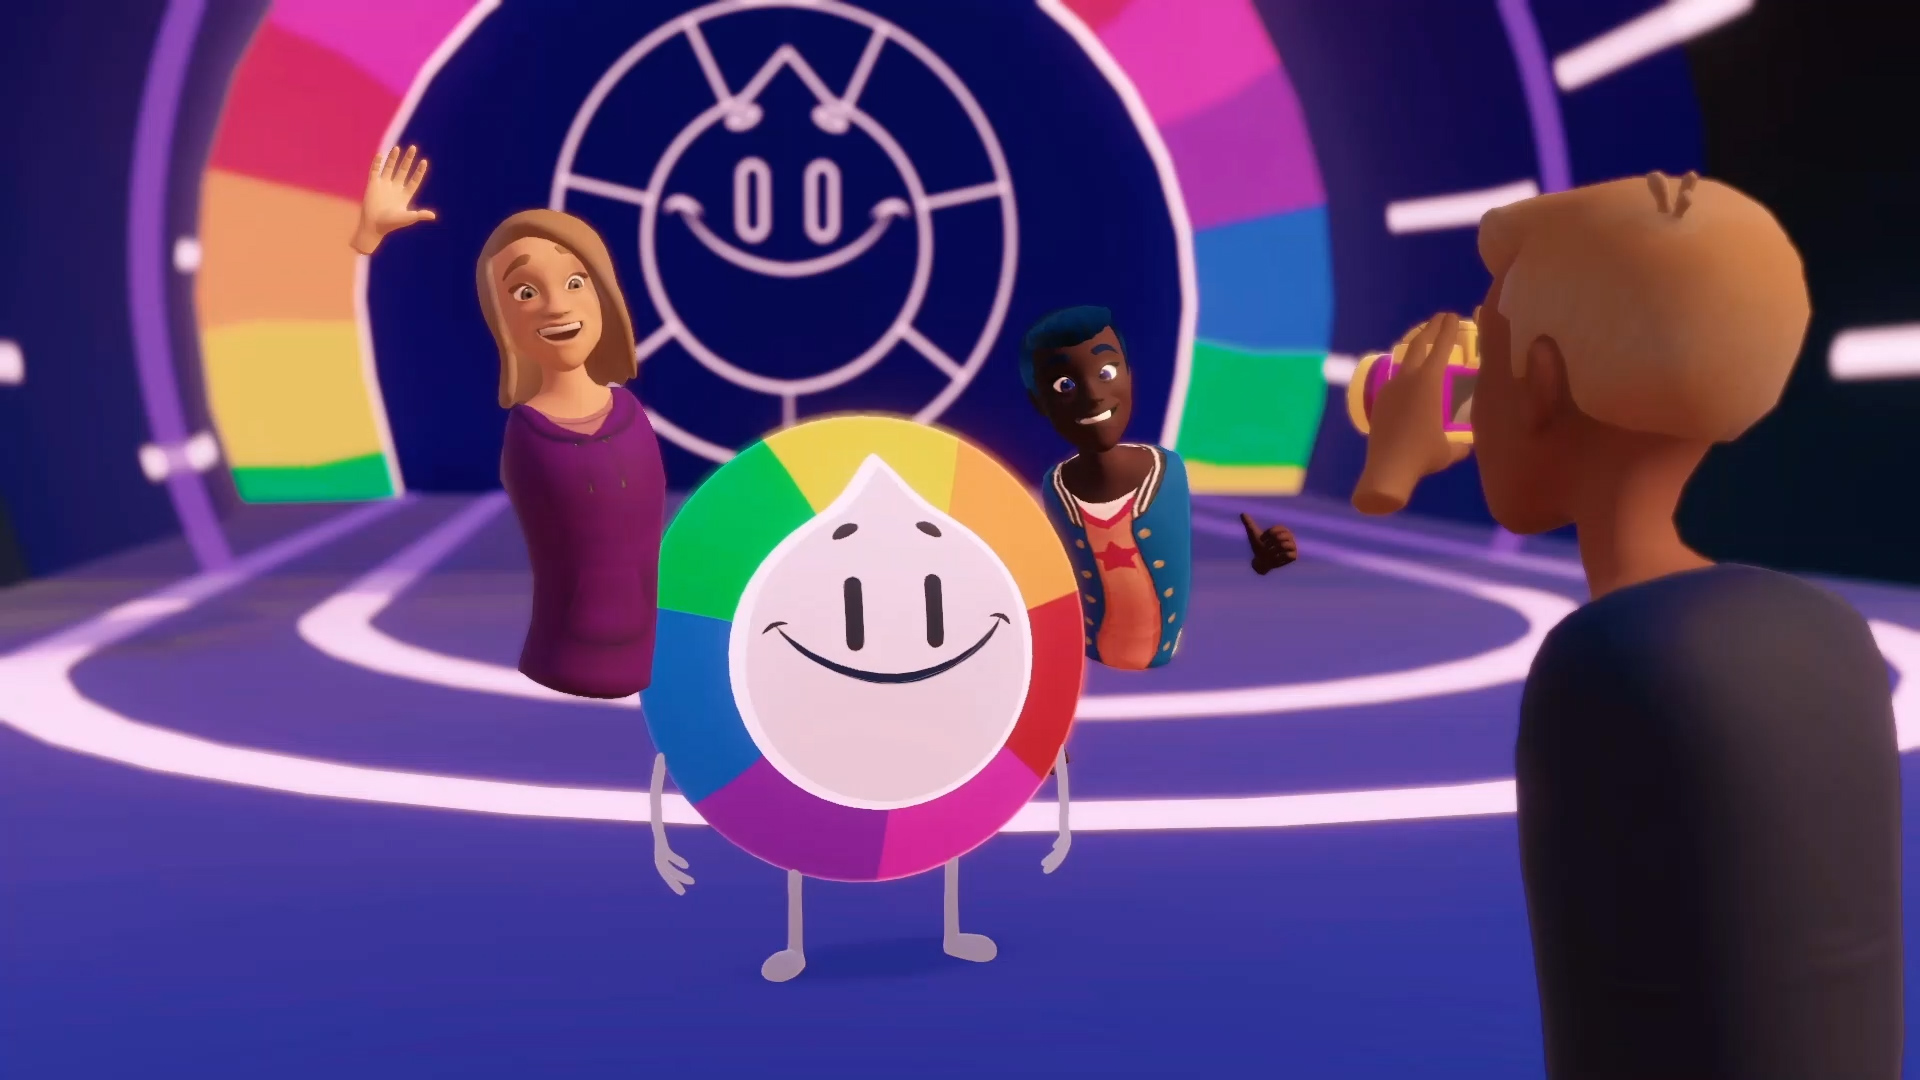 Trivia Crack Is Getting Its Own VR Game - VRScout